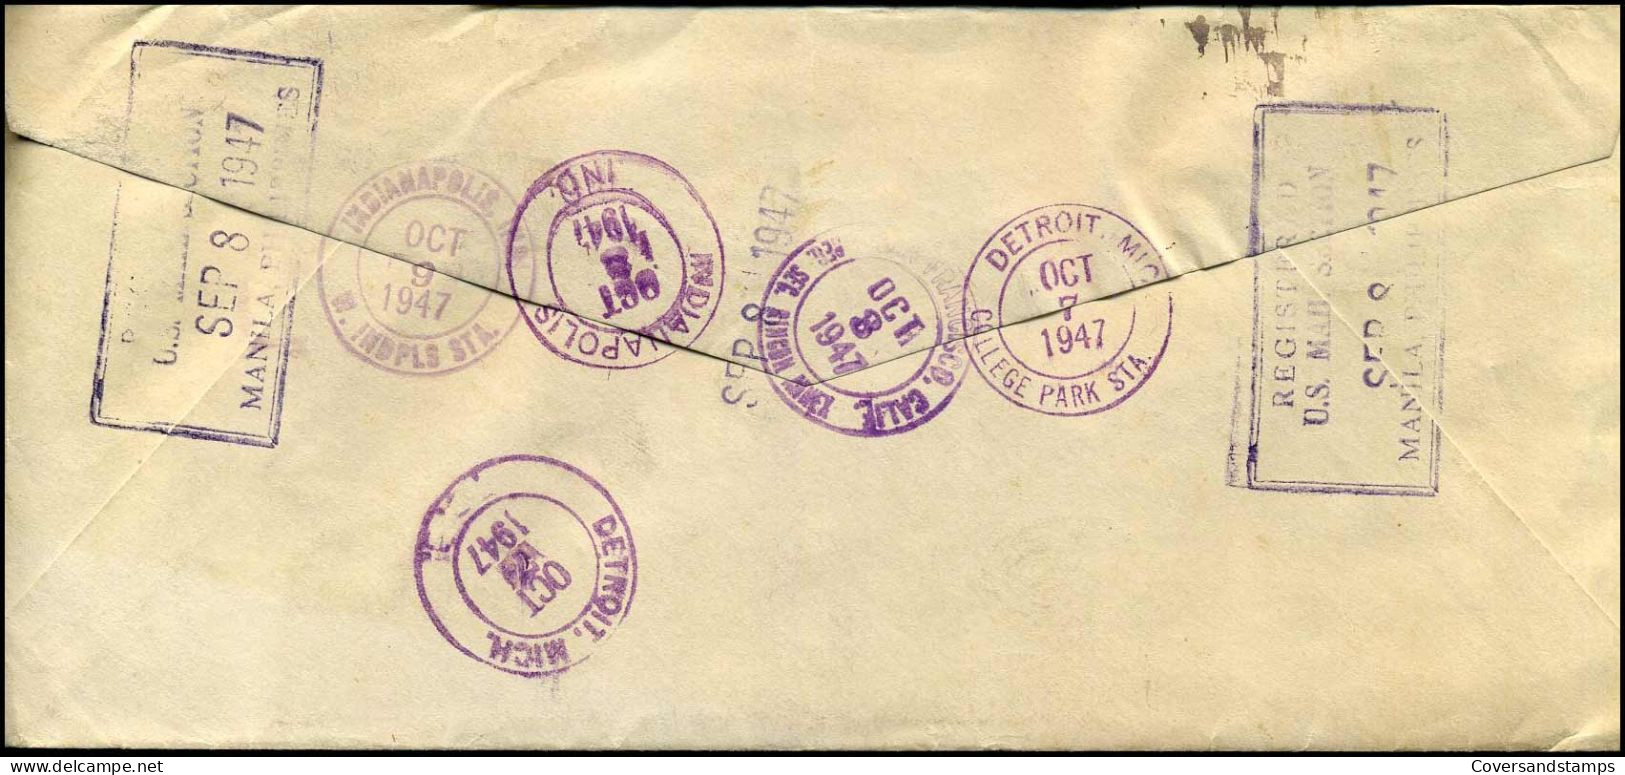 Registered Cover To Detroit, USA - Philippines